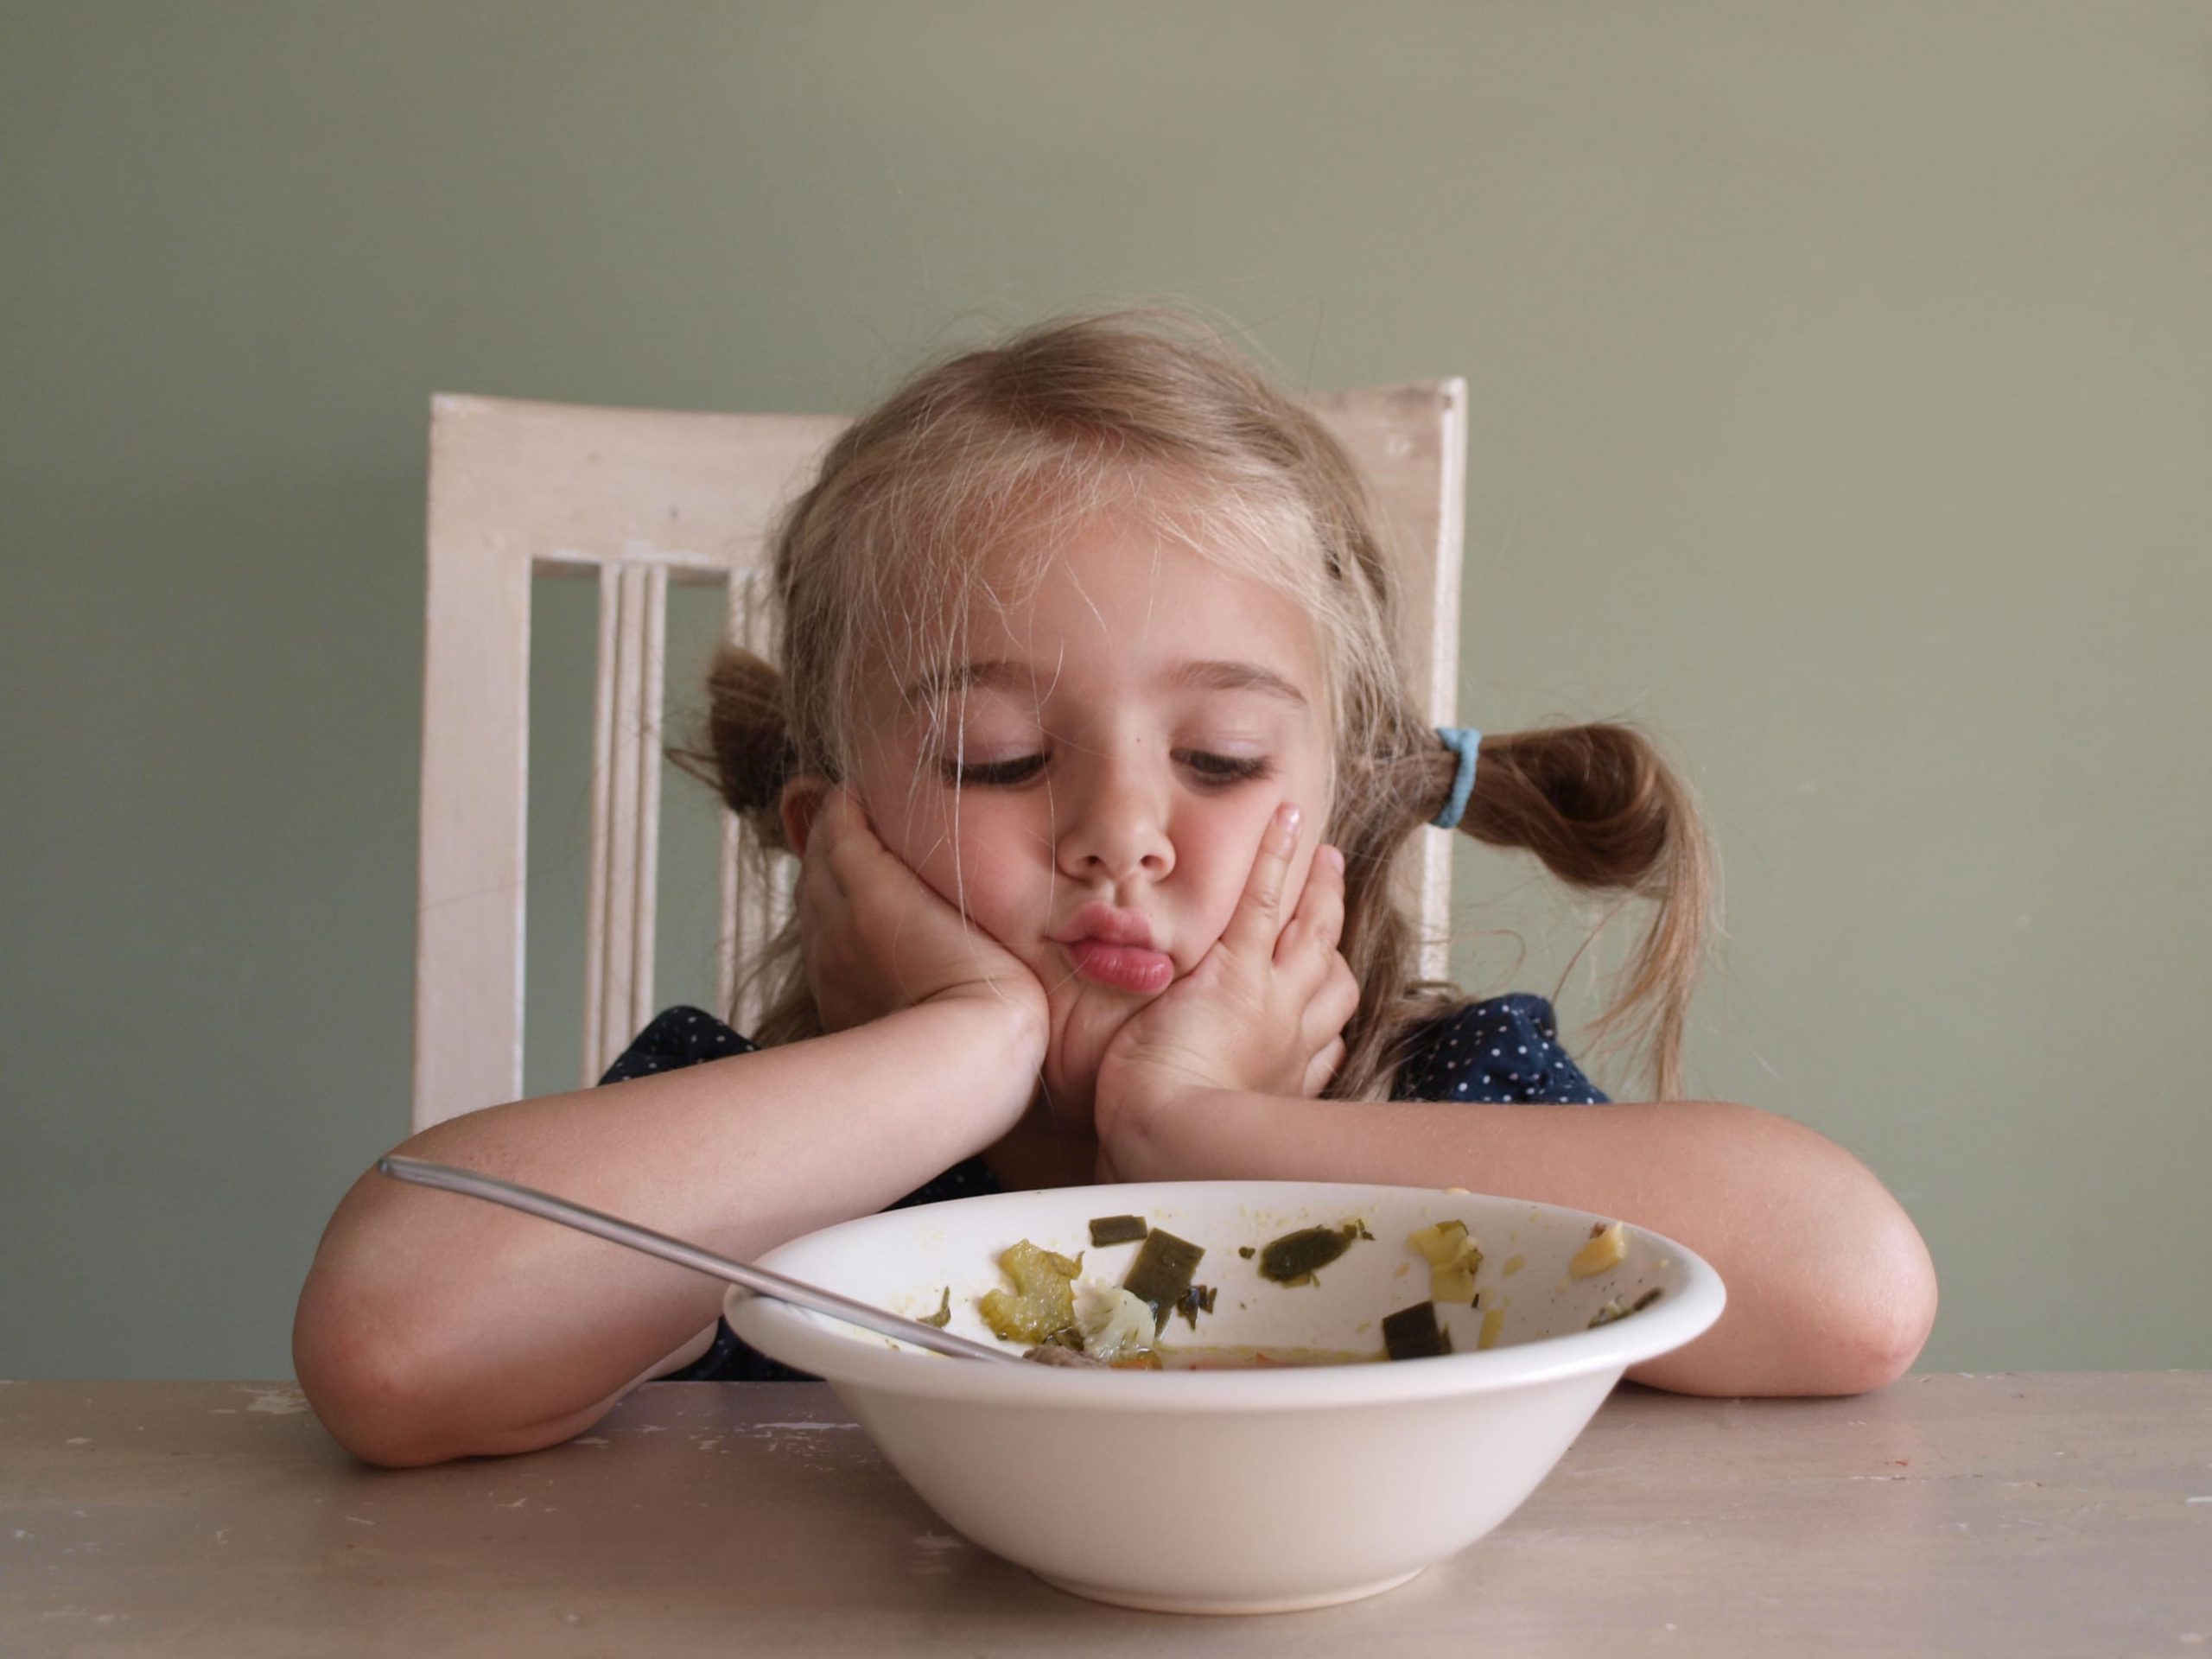 Child Looking Upset About eating vegetables